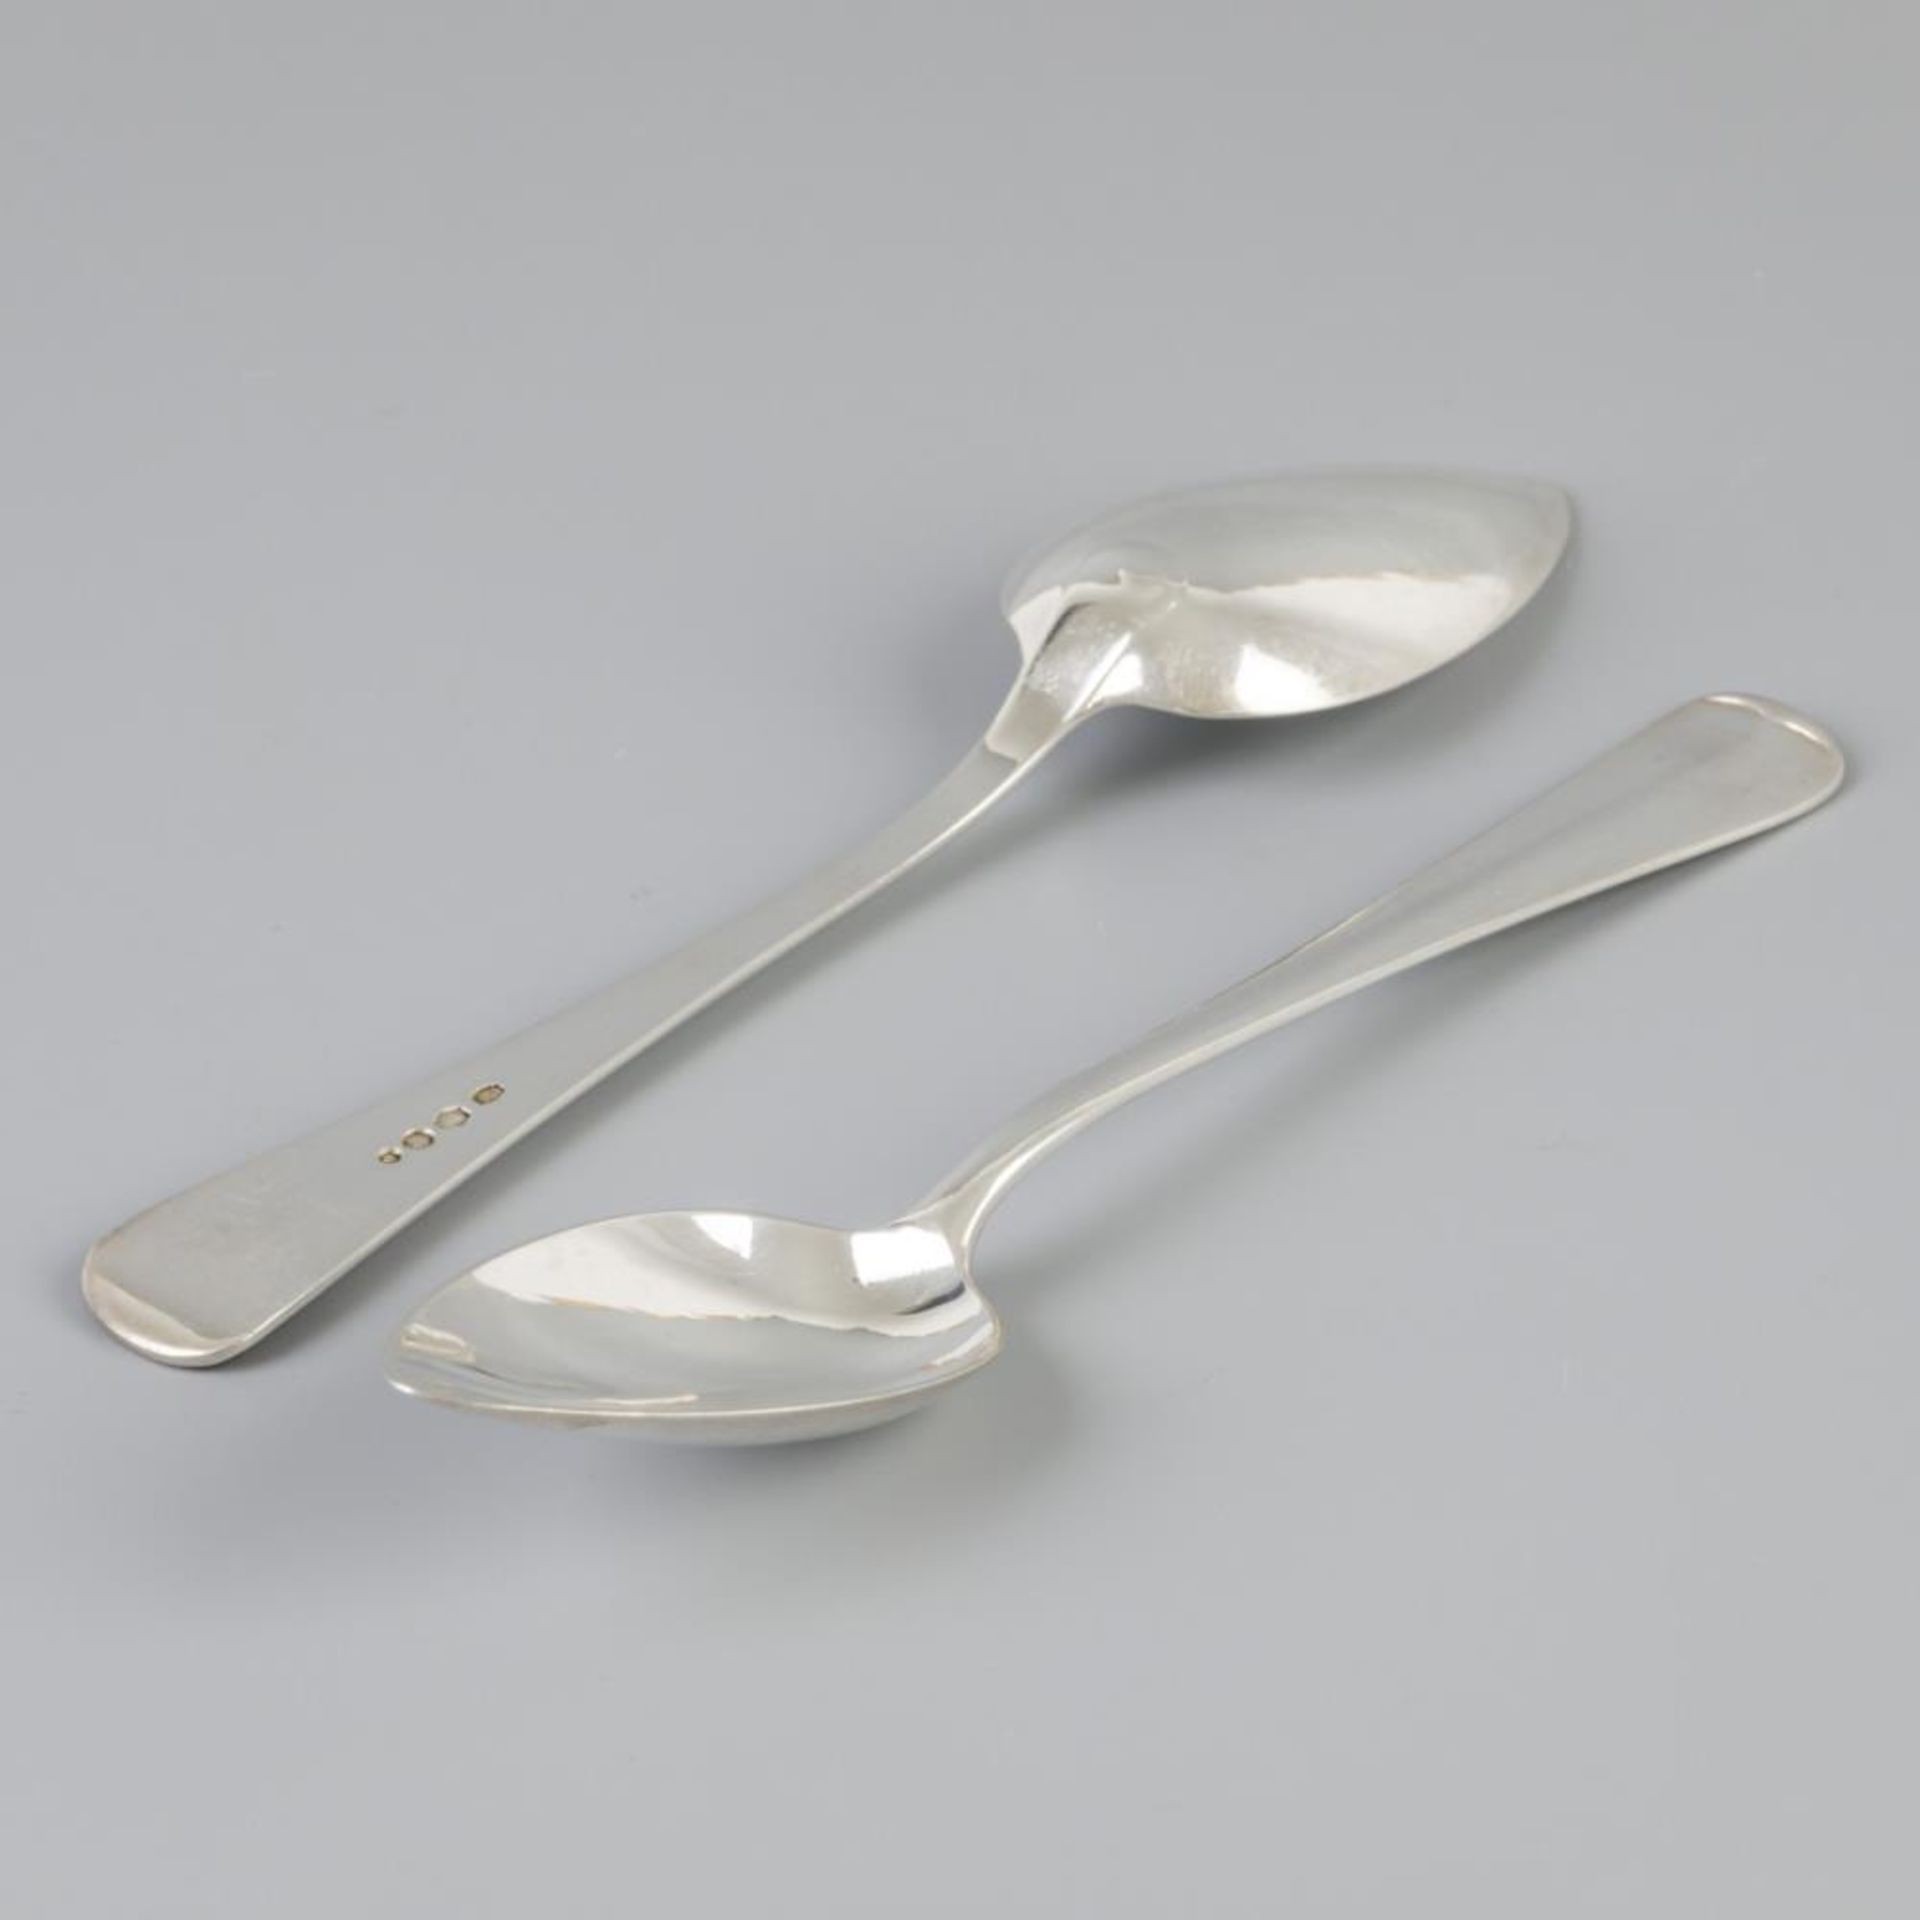 6 piece set dinner spoons "Haags Lofje" silver. - Image 5 of 6